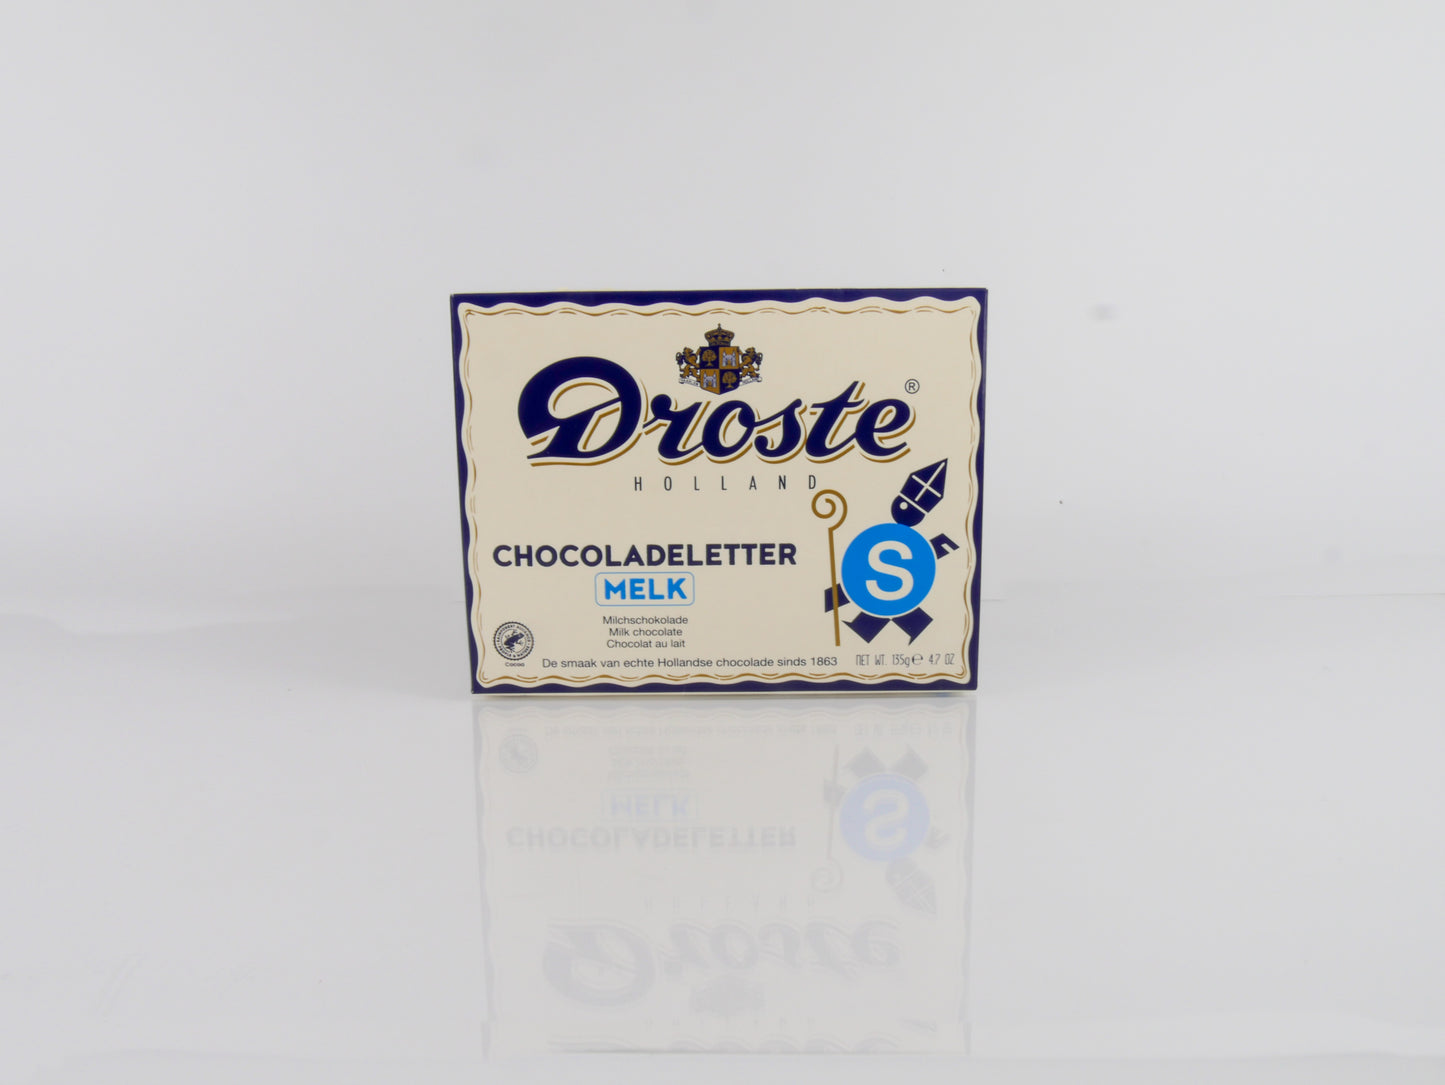 Droste Chocoladeletters